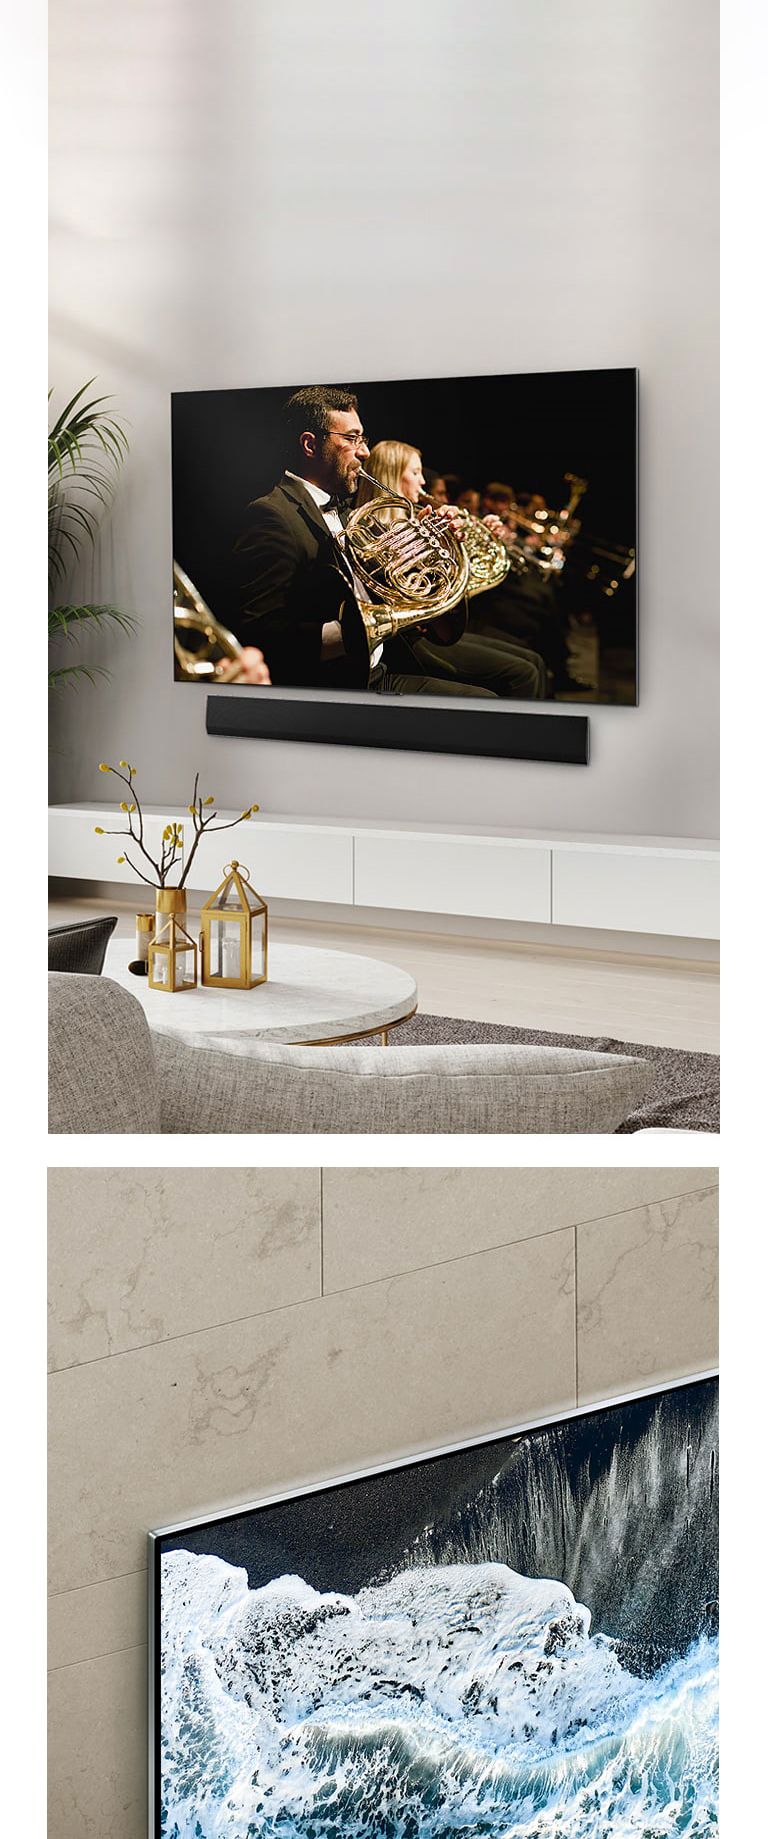 One image features an angled view of the bottom corner of the LG OLED G4, displaying blue waves. In another, the LG OLED G4, with its ultra-slim one wall design, seamlessly blends into a clean living space, showcasing an orchestral performance on screen.